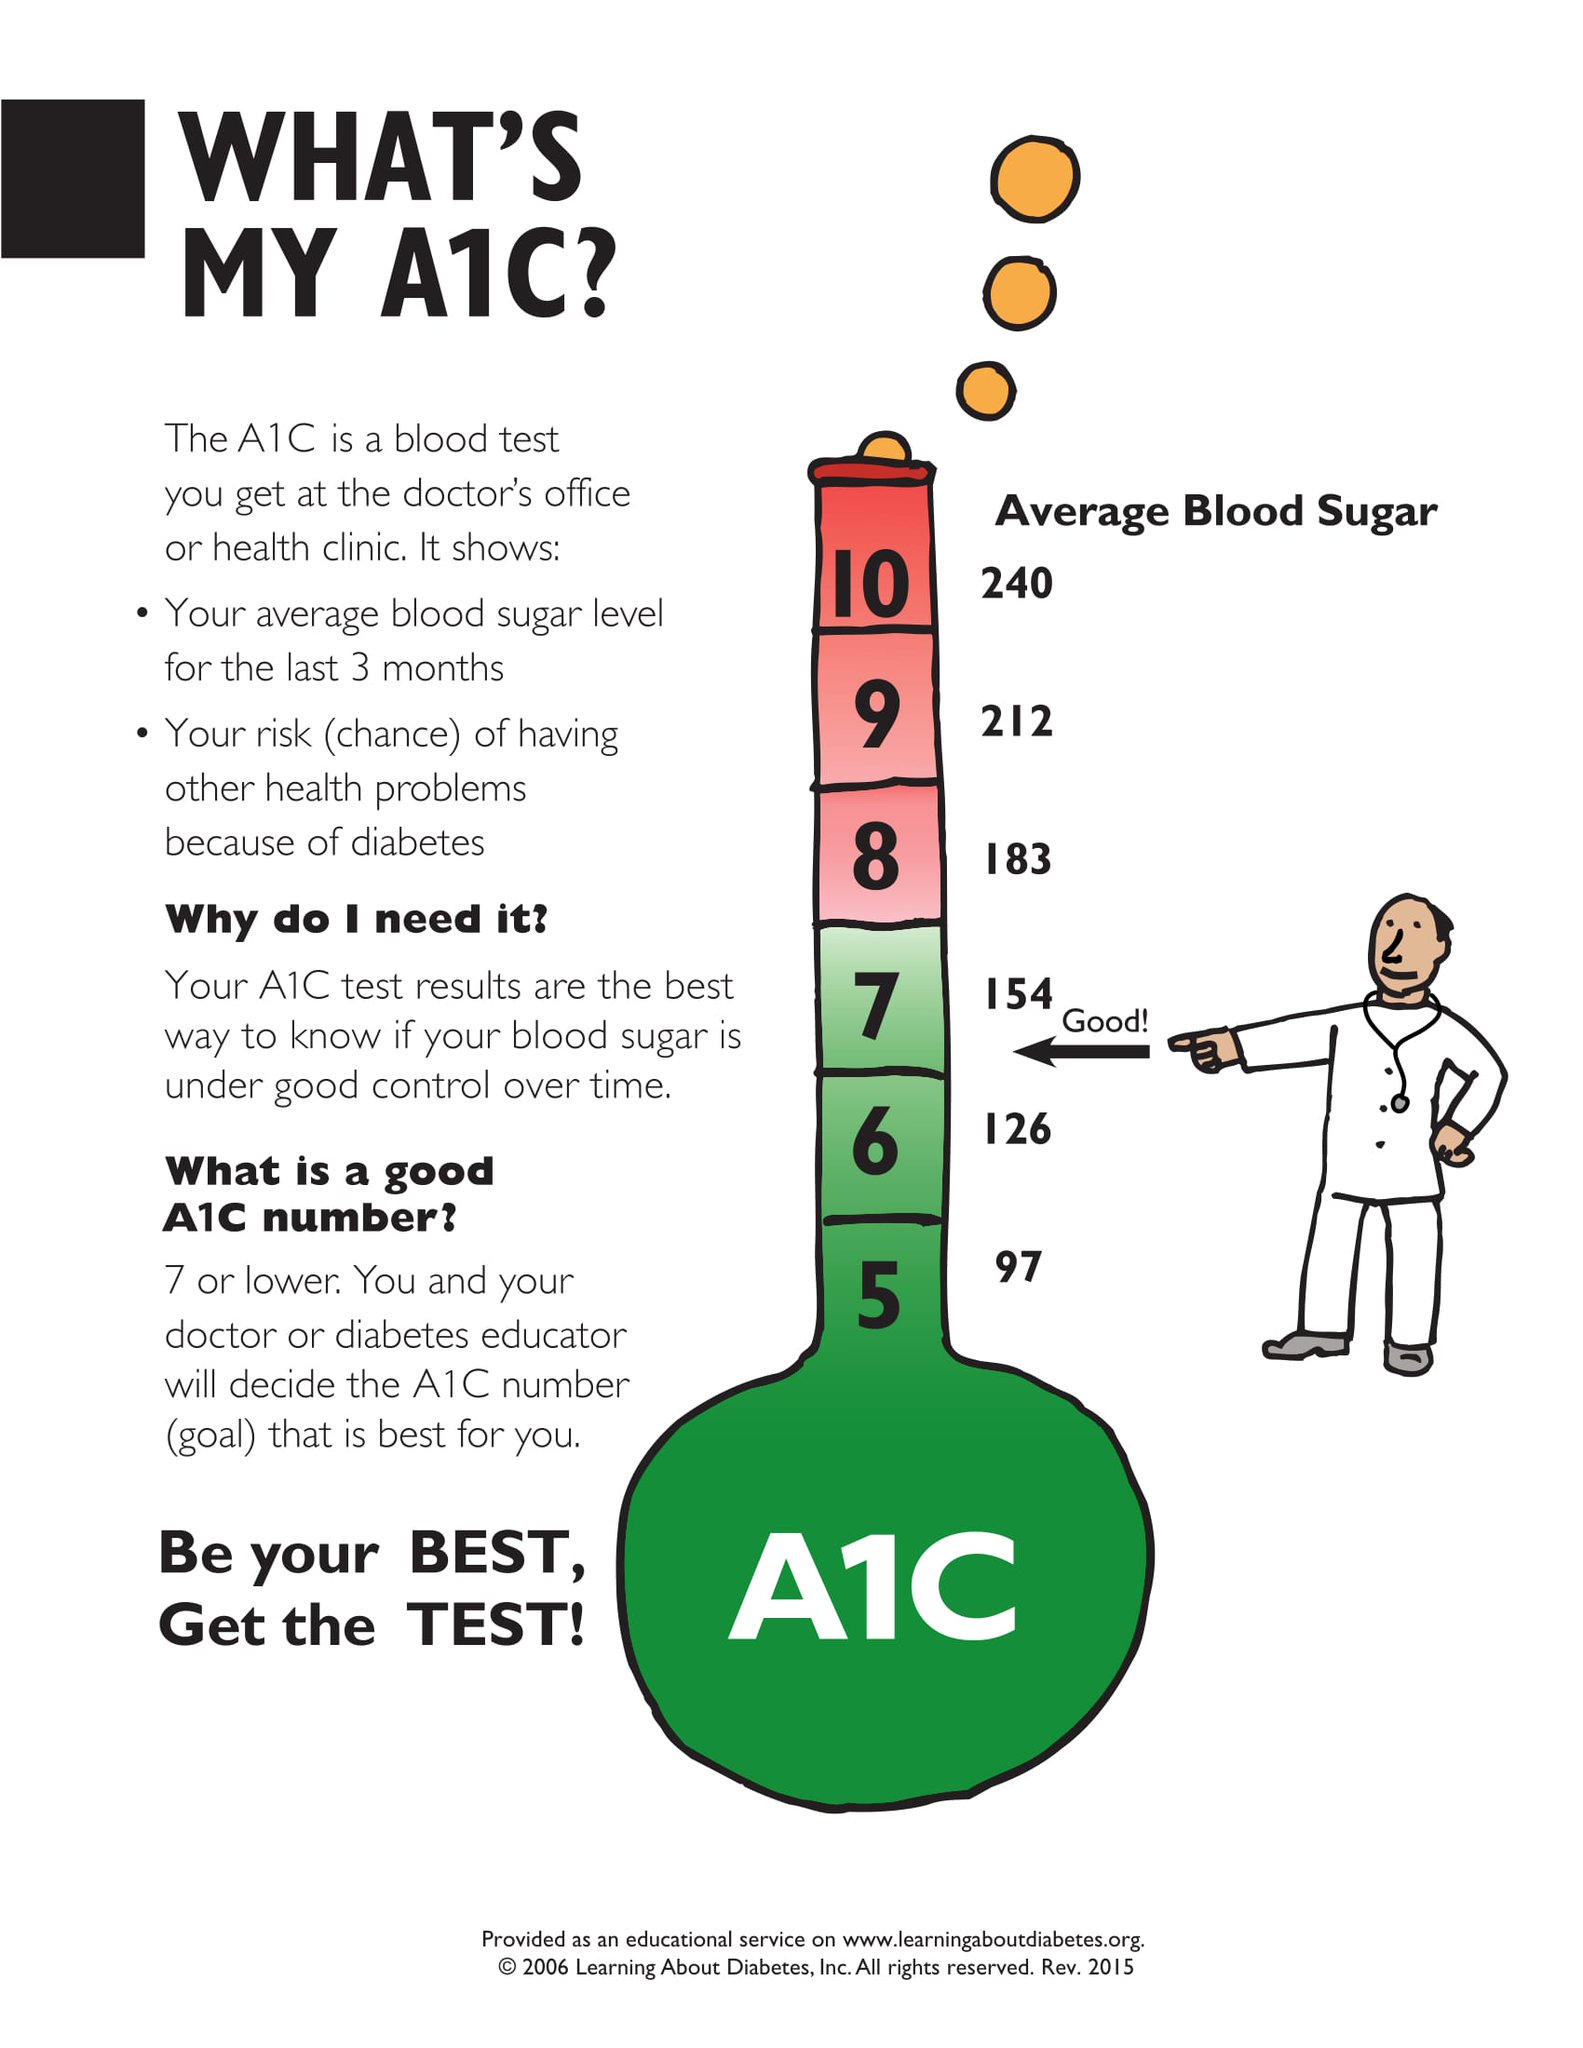 Latino Diabetes on Twitter: "Do you know what an A1C test ...